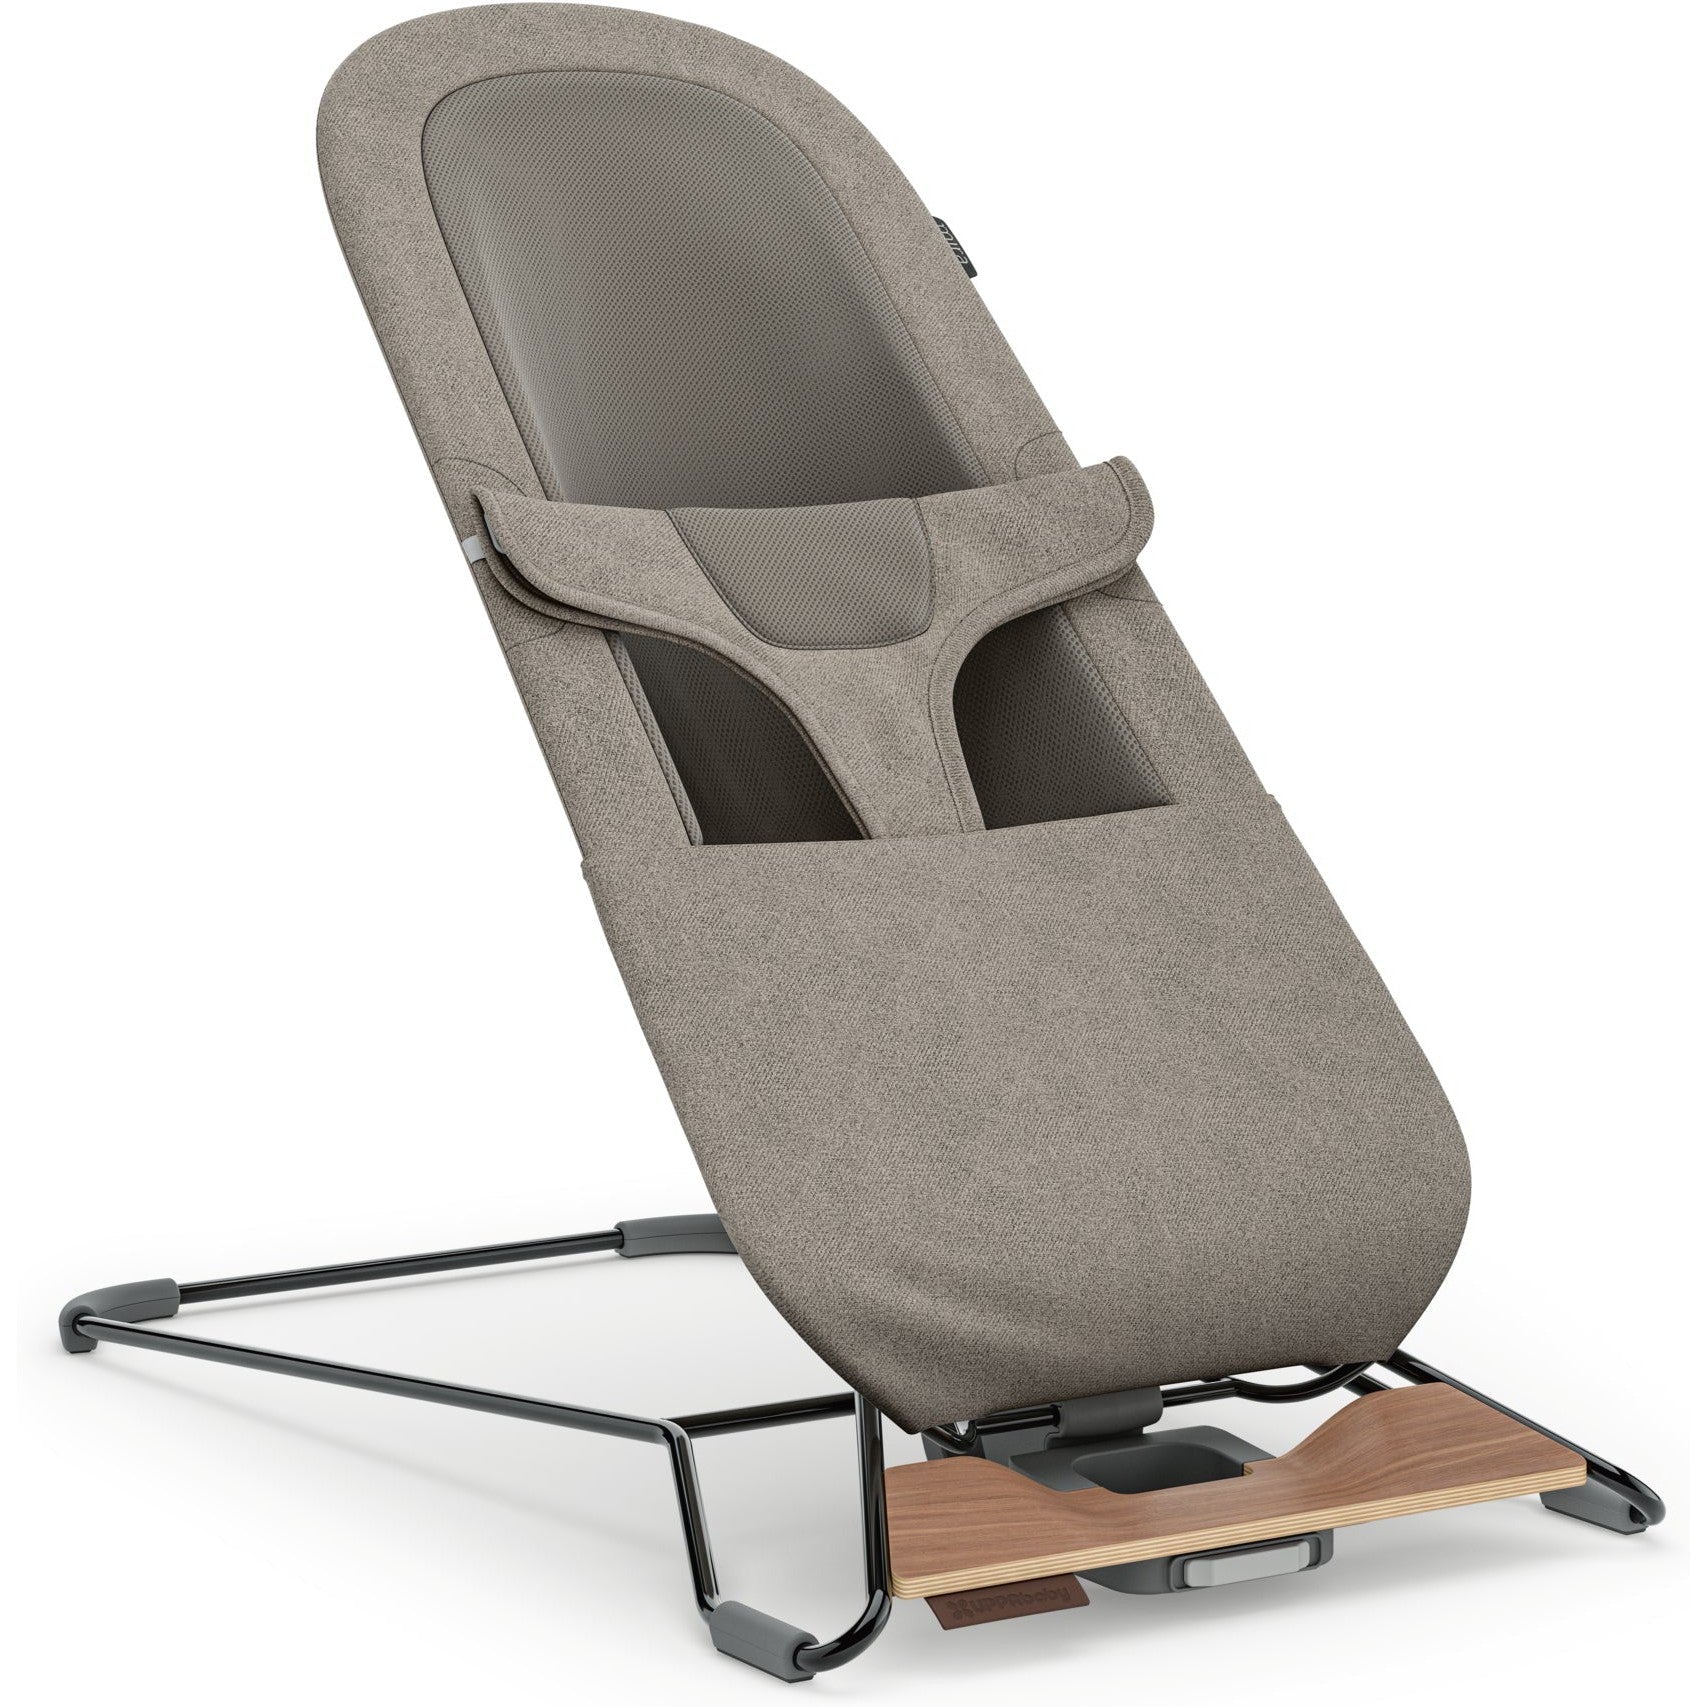 UPPAbaby Mira 2-in-1 Bouncer & Seat - Twinkle Twinkle Little One